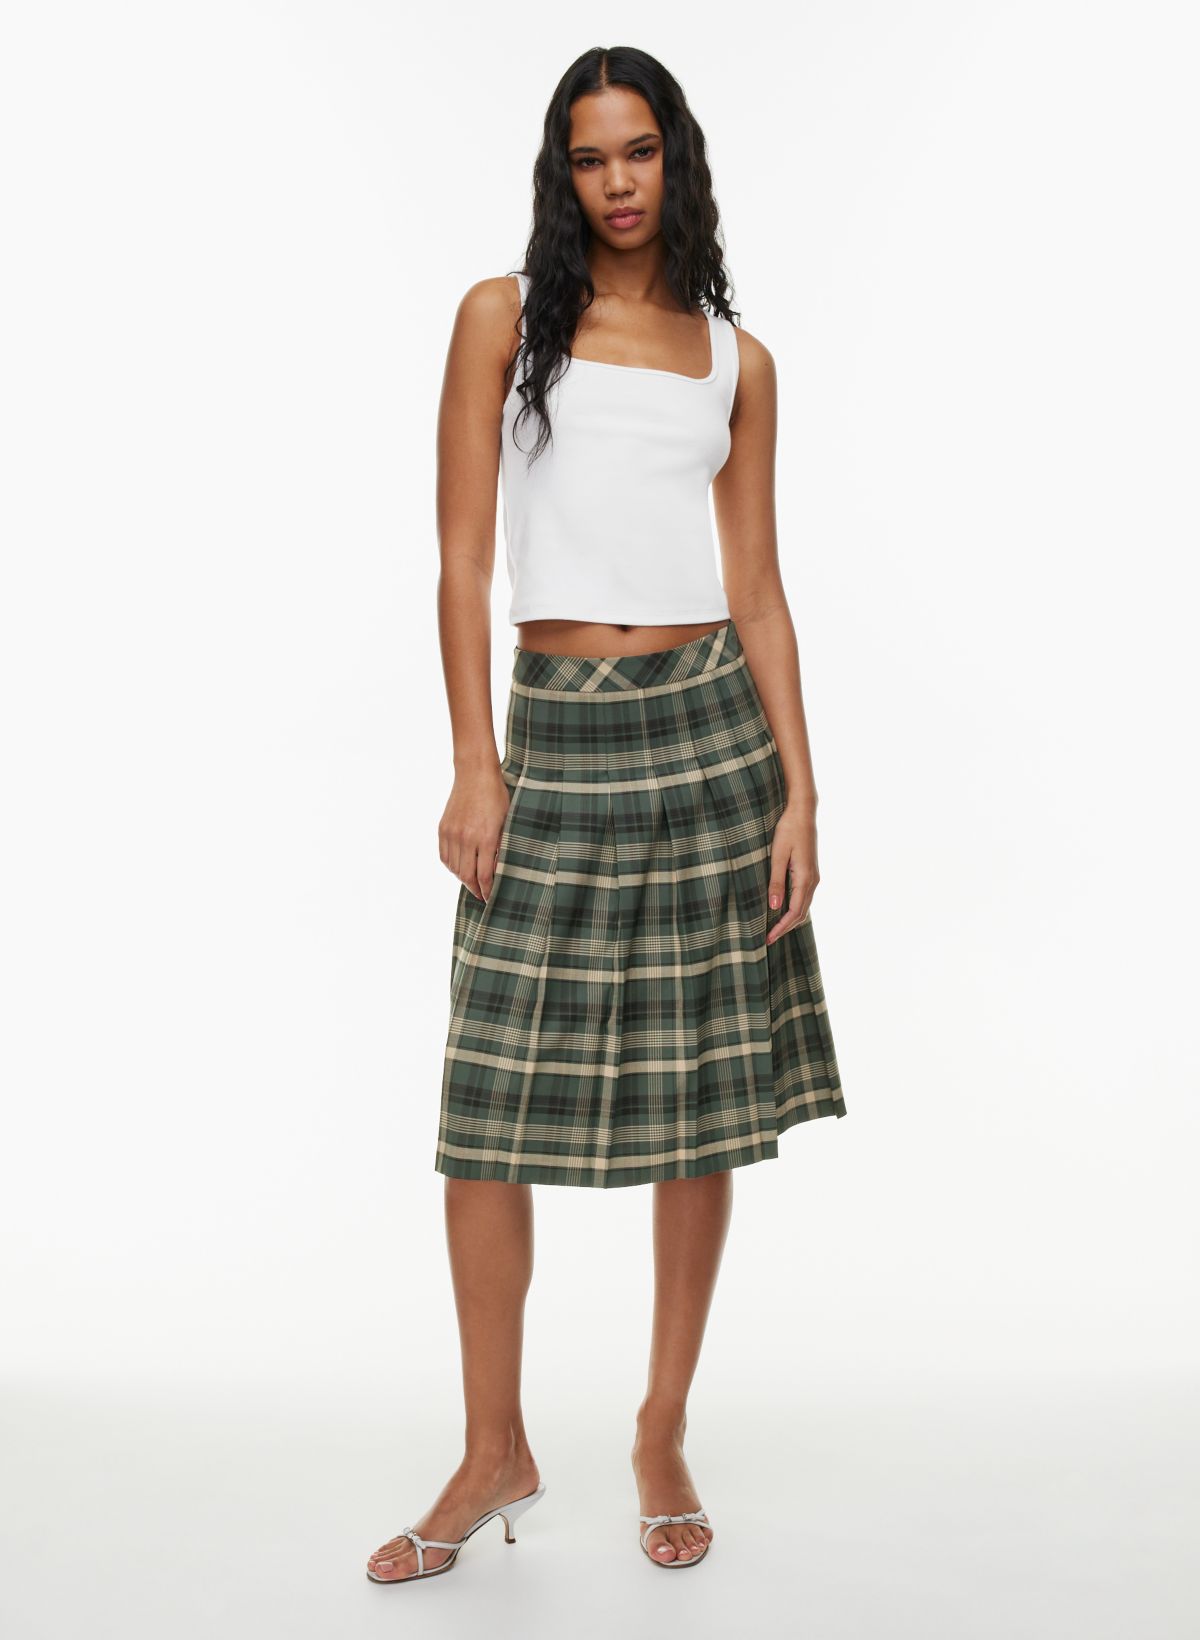 Try-On Reviews: Pleat to Street Skirt + All Sport Support Tank +